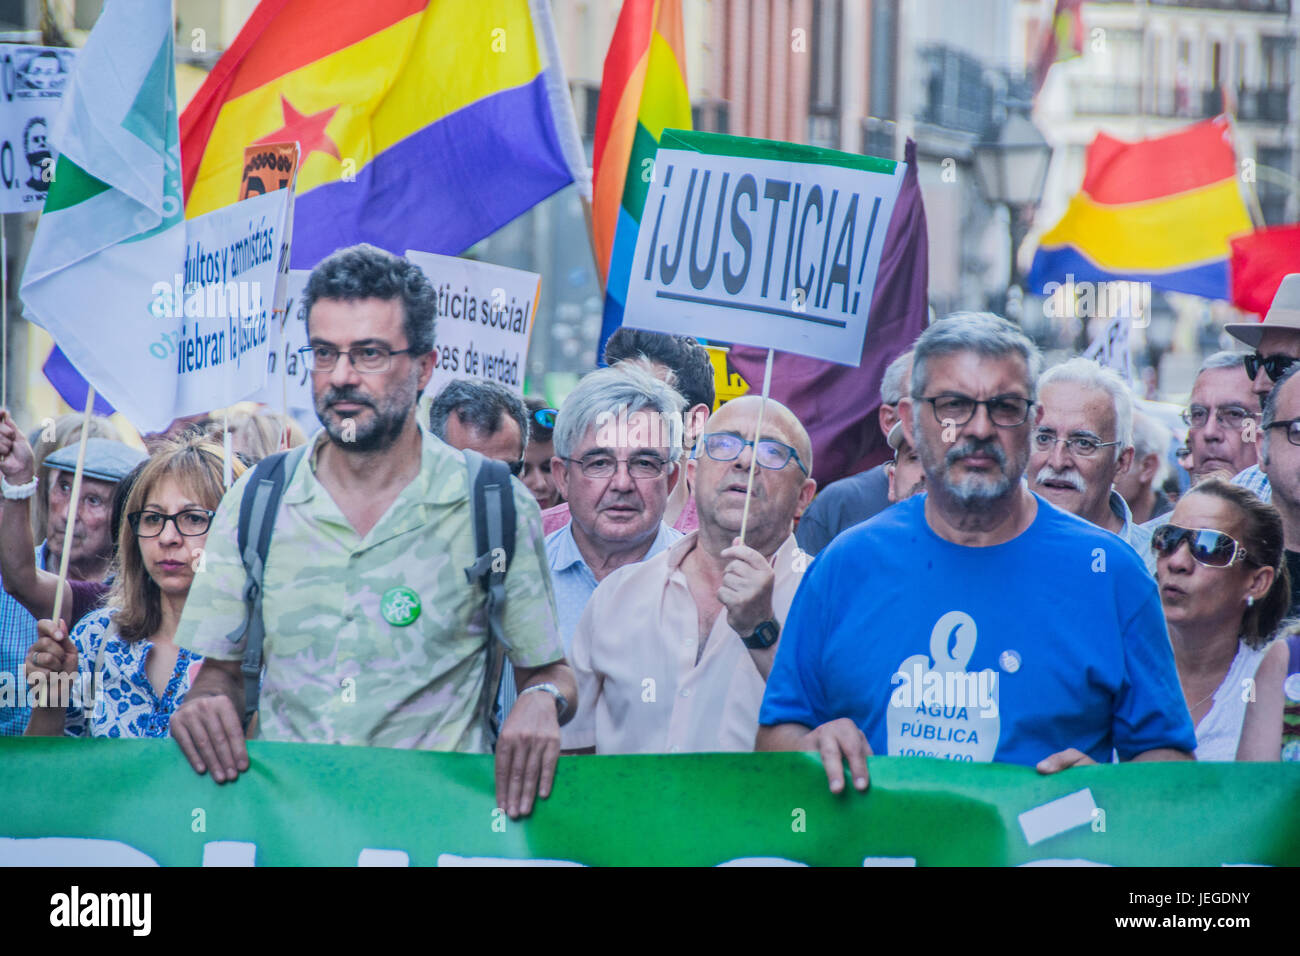 Madrid, Spain. 24th Jun, 2017.   Protest against corruption in Madrid, the demonstration took place from Glorieta de Embajadores to square Puerta del Sol.   The demonstration is about the corruption of the government of partido popular of Mariano Rajoy in Madrid, Spain. Credit: Alberto Sibaja Ramírez/Alamy Live News Stock Photo